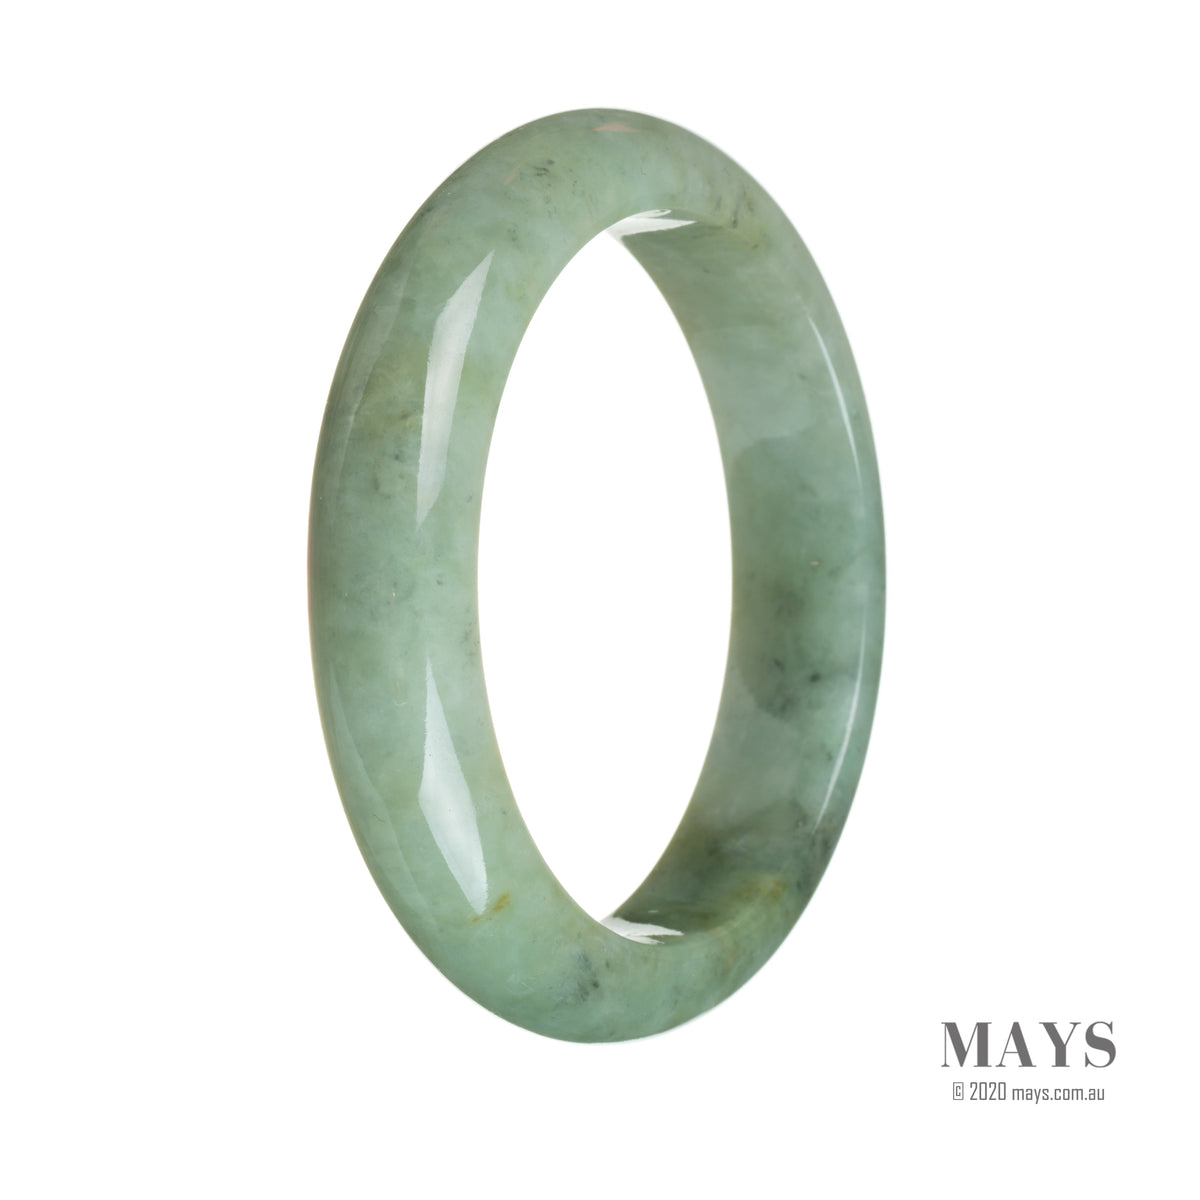 A light green traditional jade bracelet with a semi-round shape, measuring 60mm. Made from authentic Grade A jade.